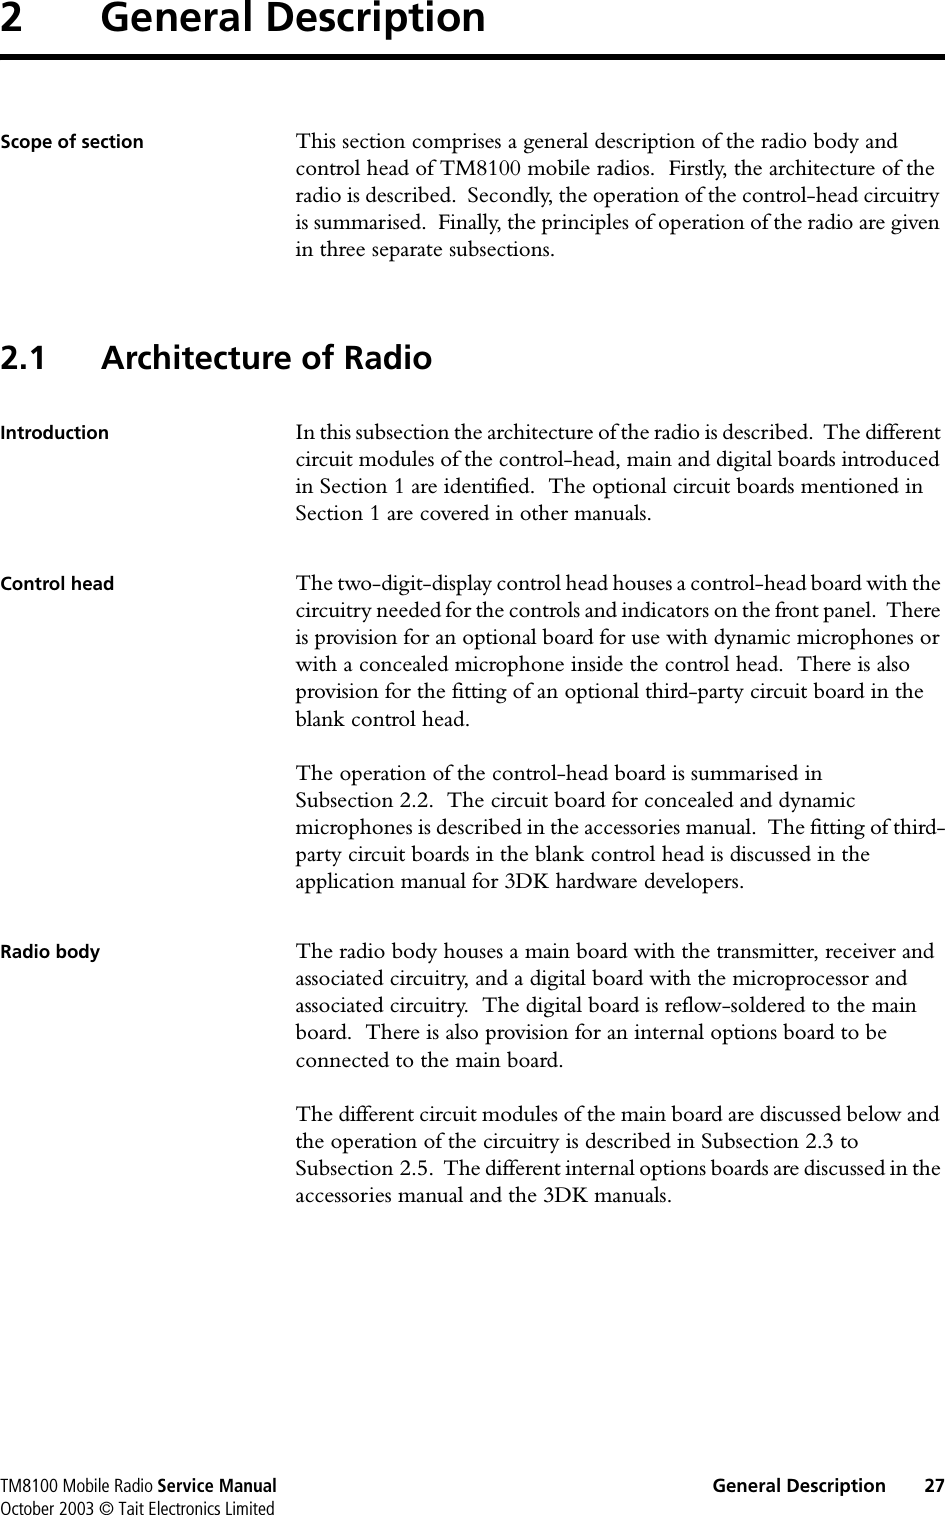 TM8100 Mobile Radio Service Manual General Description 27October 2003 © Tait Electronics Limited2 General DescriptionScope of section This section comprises a general description of the radio body and control head of TM8100 mobile radios.  Firstly, the architecture of the radio is described.  Secondly, the operation of the control-head circuitry is summarised.  Finally, the principles of operation of the radio are given in three separate subsections.2.1 Architecture of RadioIntroduction In this subsection the architecture of the radio is described.  The different circuit modules of the control-head, main and digital boards introduced in Section 1 are identified.  The optional circuit boards mentioned in Section 1 are covered in other manuals.Control head The two-digit-display control head houses a control-head board with the circuitry needed for the controls and indicators on the front panel.  There is provision for an optional board for use with dynamic microphones or with a concealed microphone inside the control head.  There is also provision for the fitting of an optional third-party circuit board in the blank control head.The operation of the control-head board is summarised in Subsection 2.2.  The circuit board for concealed and dynamic microphones is described in the accessories manual.  The fitting of third-party circuit boards in the blank control head is discussed in the application manual for 3DK hardware developers.Radio body The radio body houses a main board with the transmitter, receiver and associated circuitry, and a digital board with the microprocessor and associated circuitry.  The digital board is reflow-soldered to the main board.  There is also provision for an internal options board to be connected to the main board.The different circuit modules of the main board are discussed below and the operation of the circuitry is described in Subsection 2.3 to Subsection 2.5.  The different internal options boards are discussed in the accessories manual and the 3DK manuals.